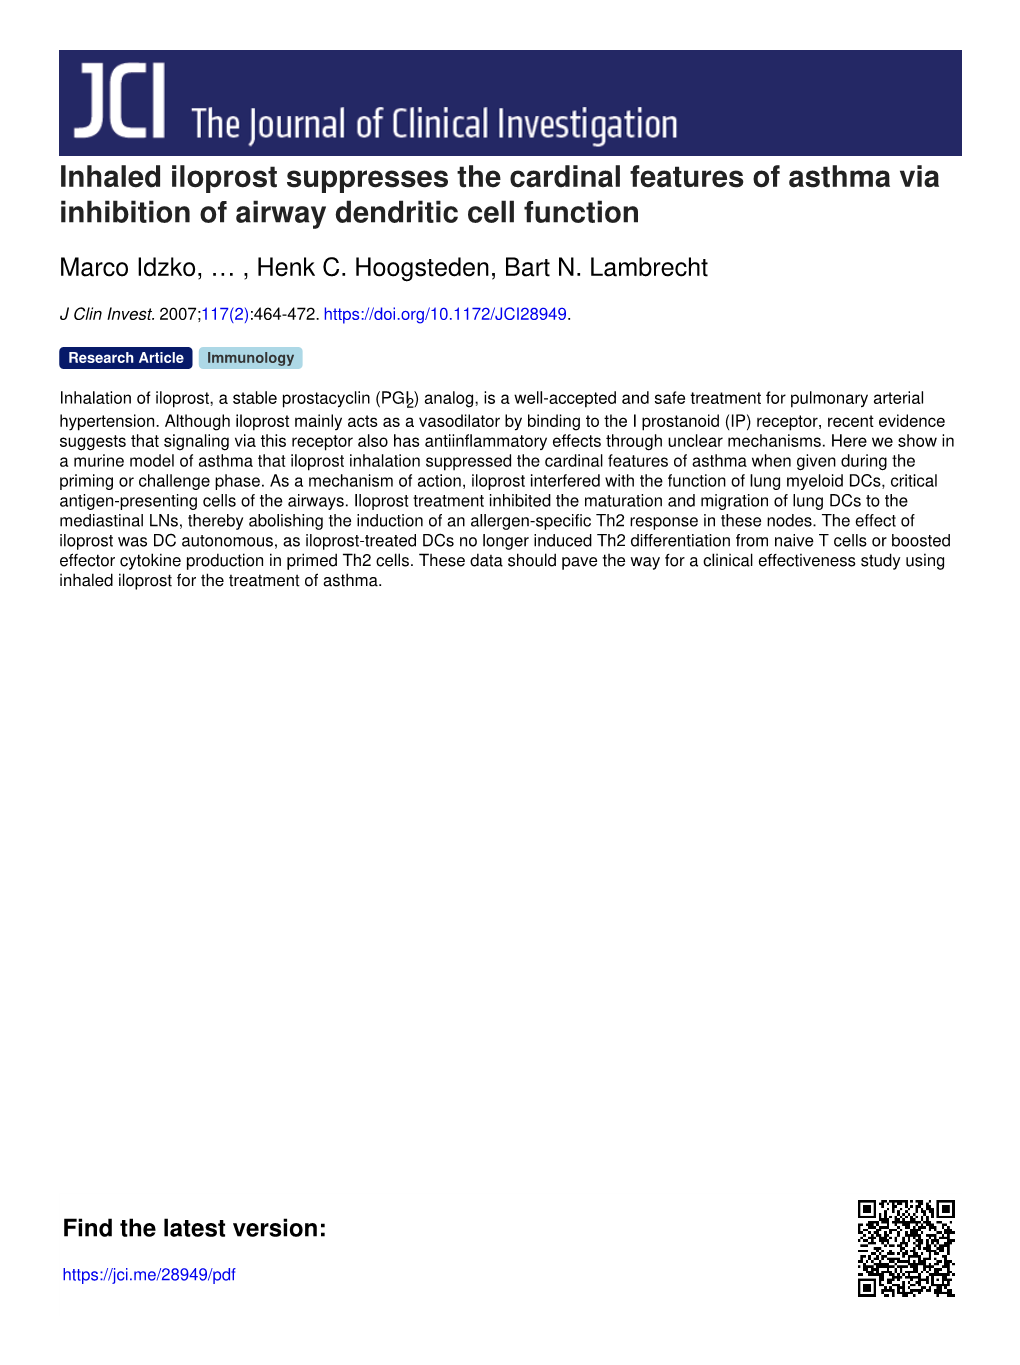 Inhaled Iloprost Suppresses the Cardinal Features of Asthma Via Inhibition of Airway Dendritic Cell Function